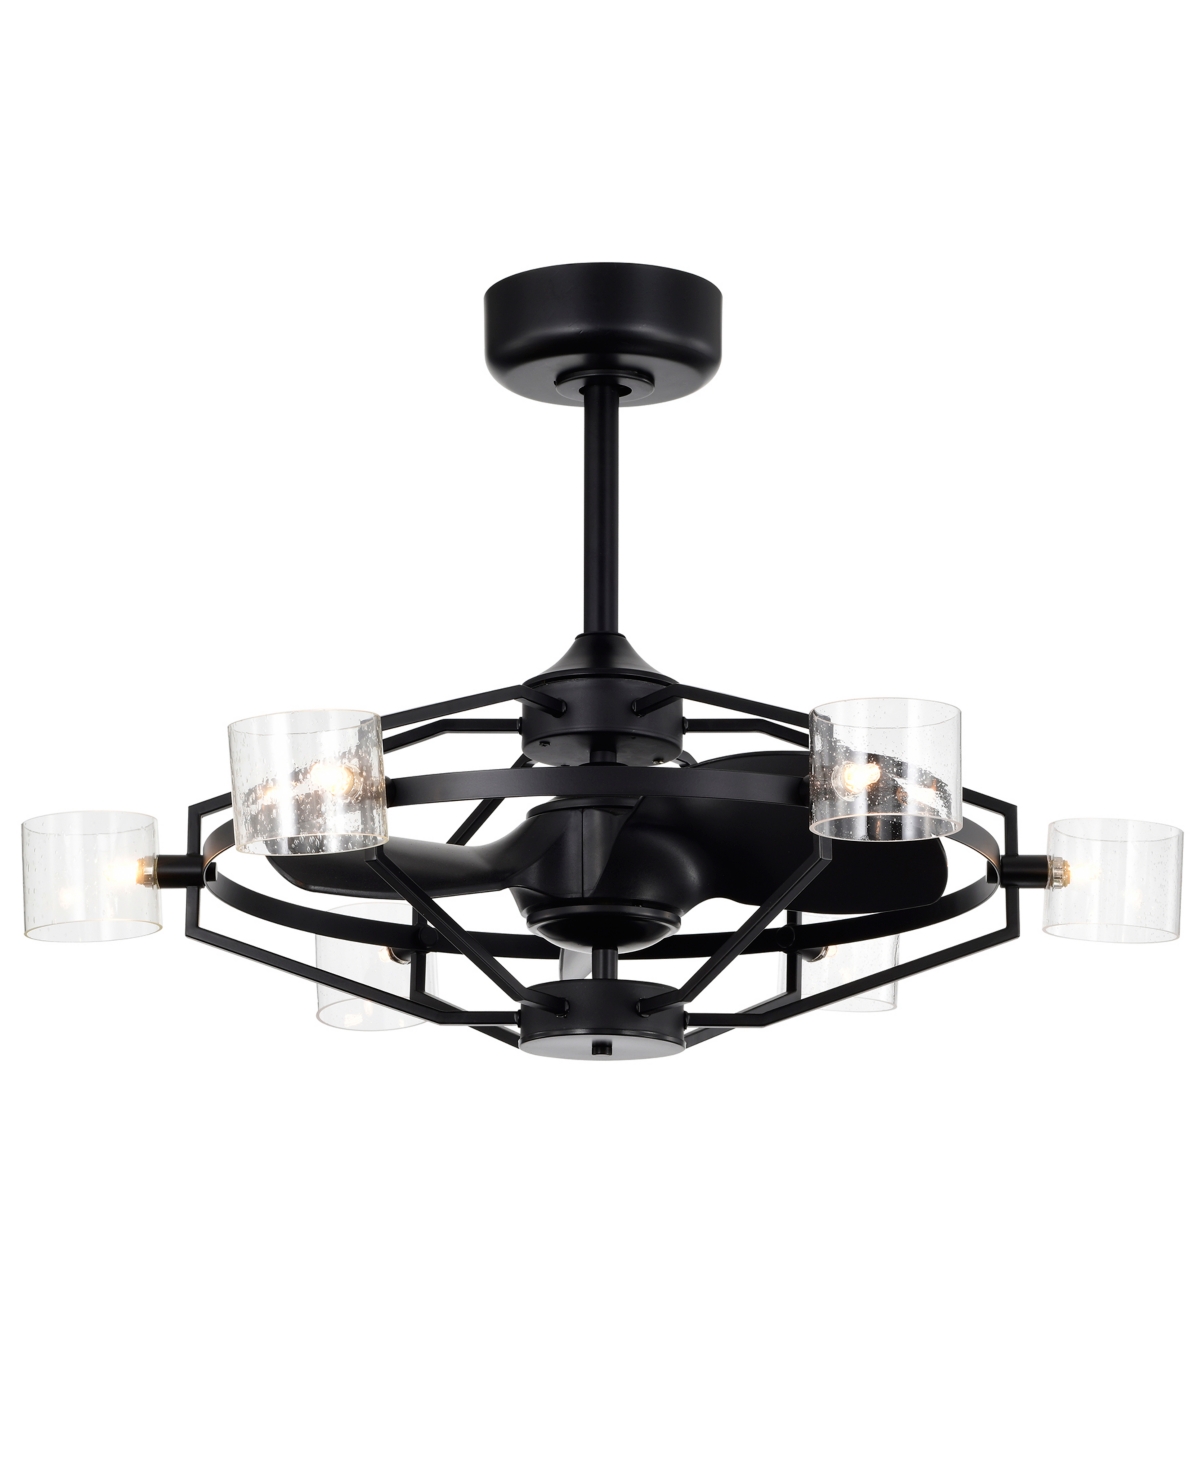 Home Accessories Damita 35" 6-light Indoor Ceiling Fan With Light Kit And Remote In Black And Gold